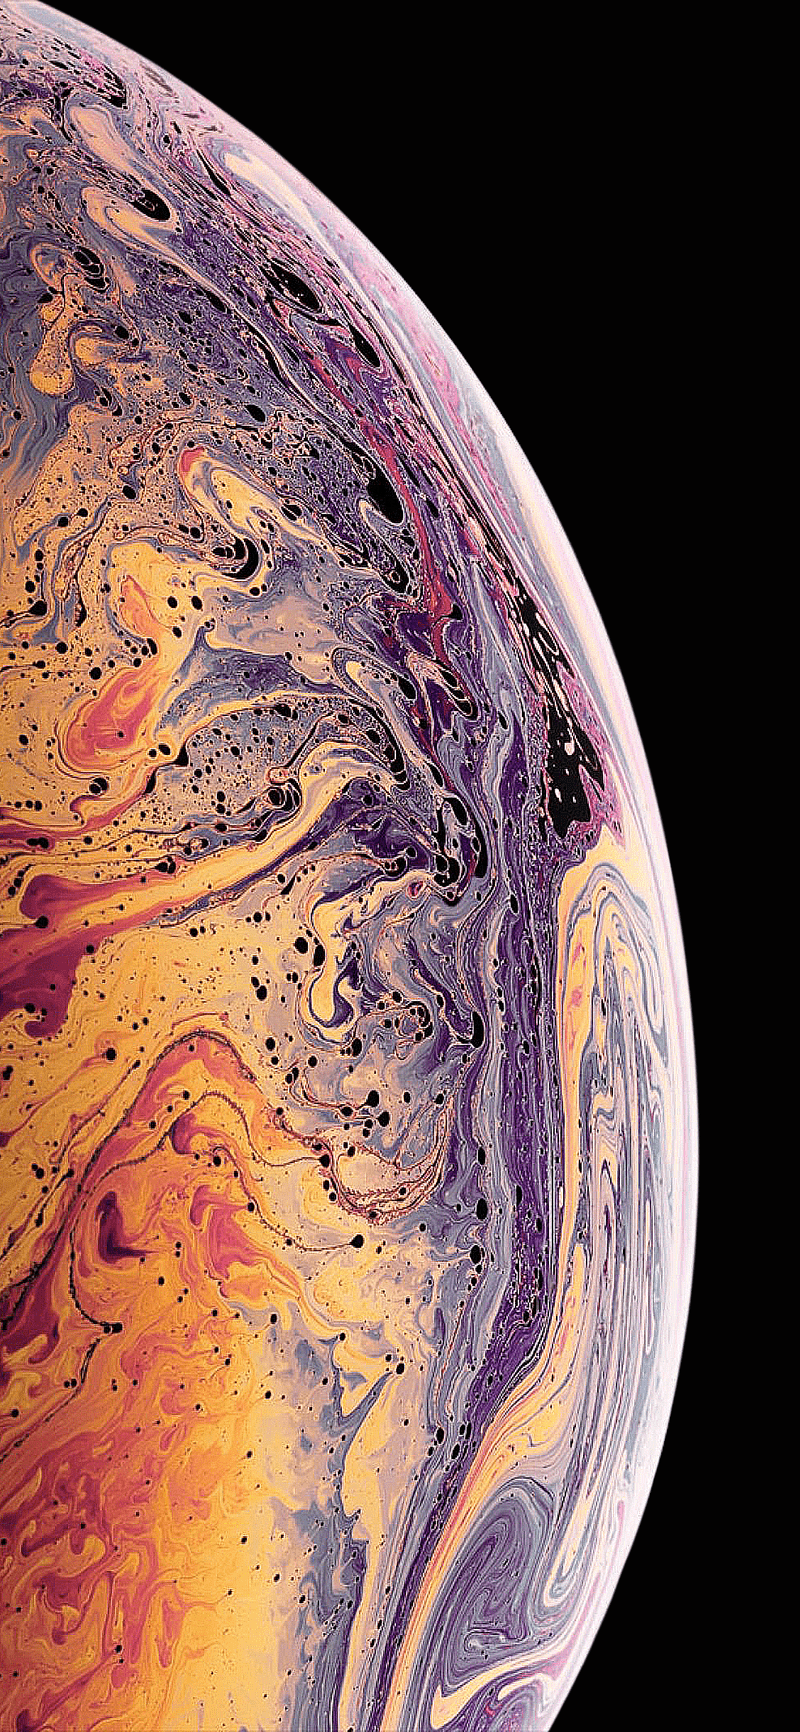 Download Original iPhone XS Max XS and XR Wallpapers 800x1732